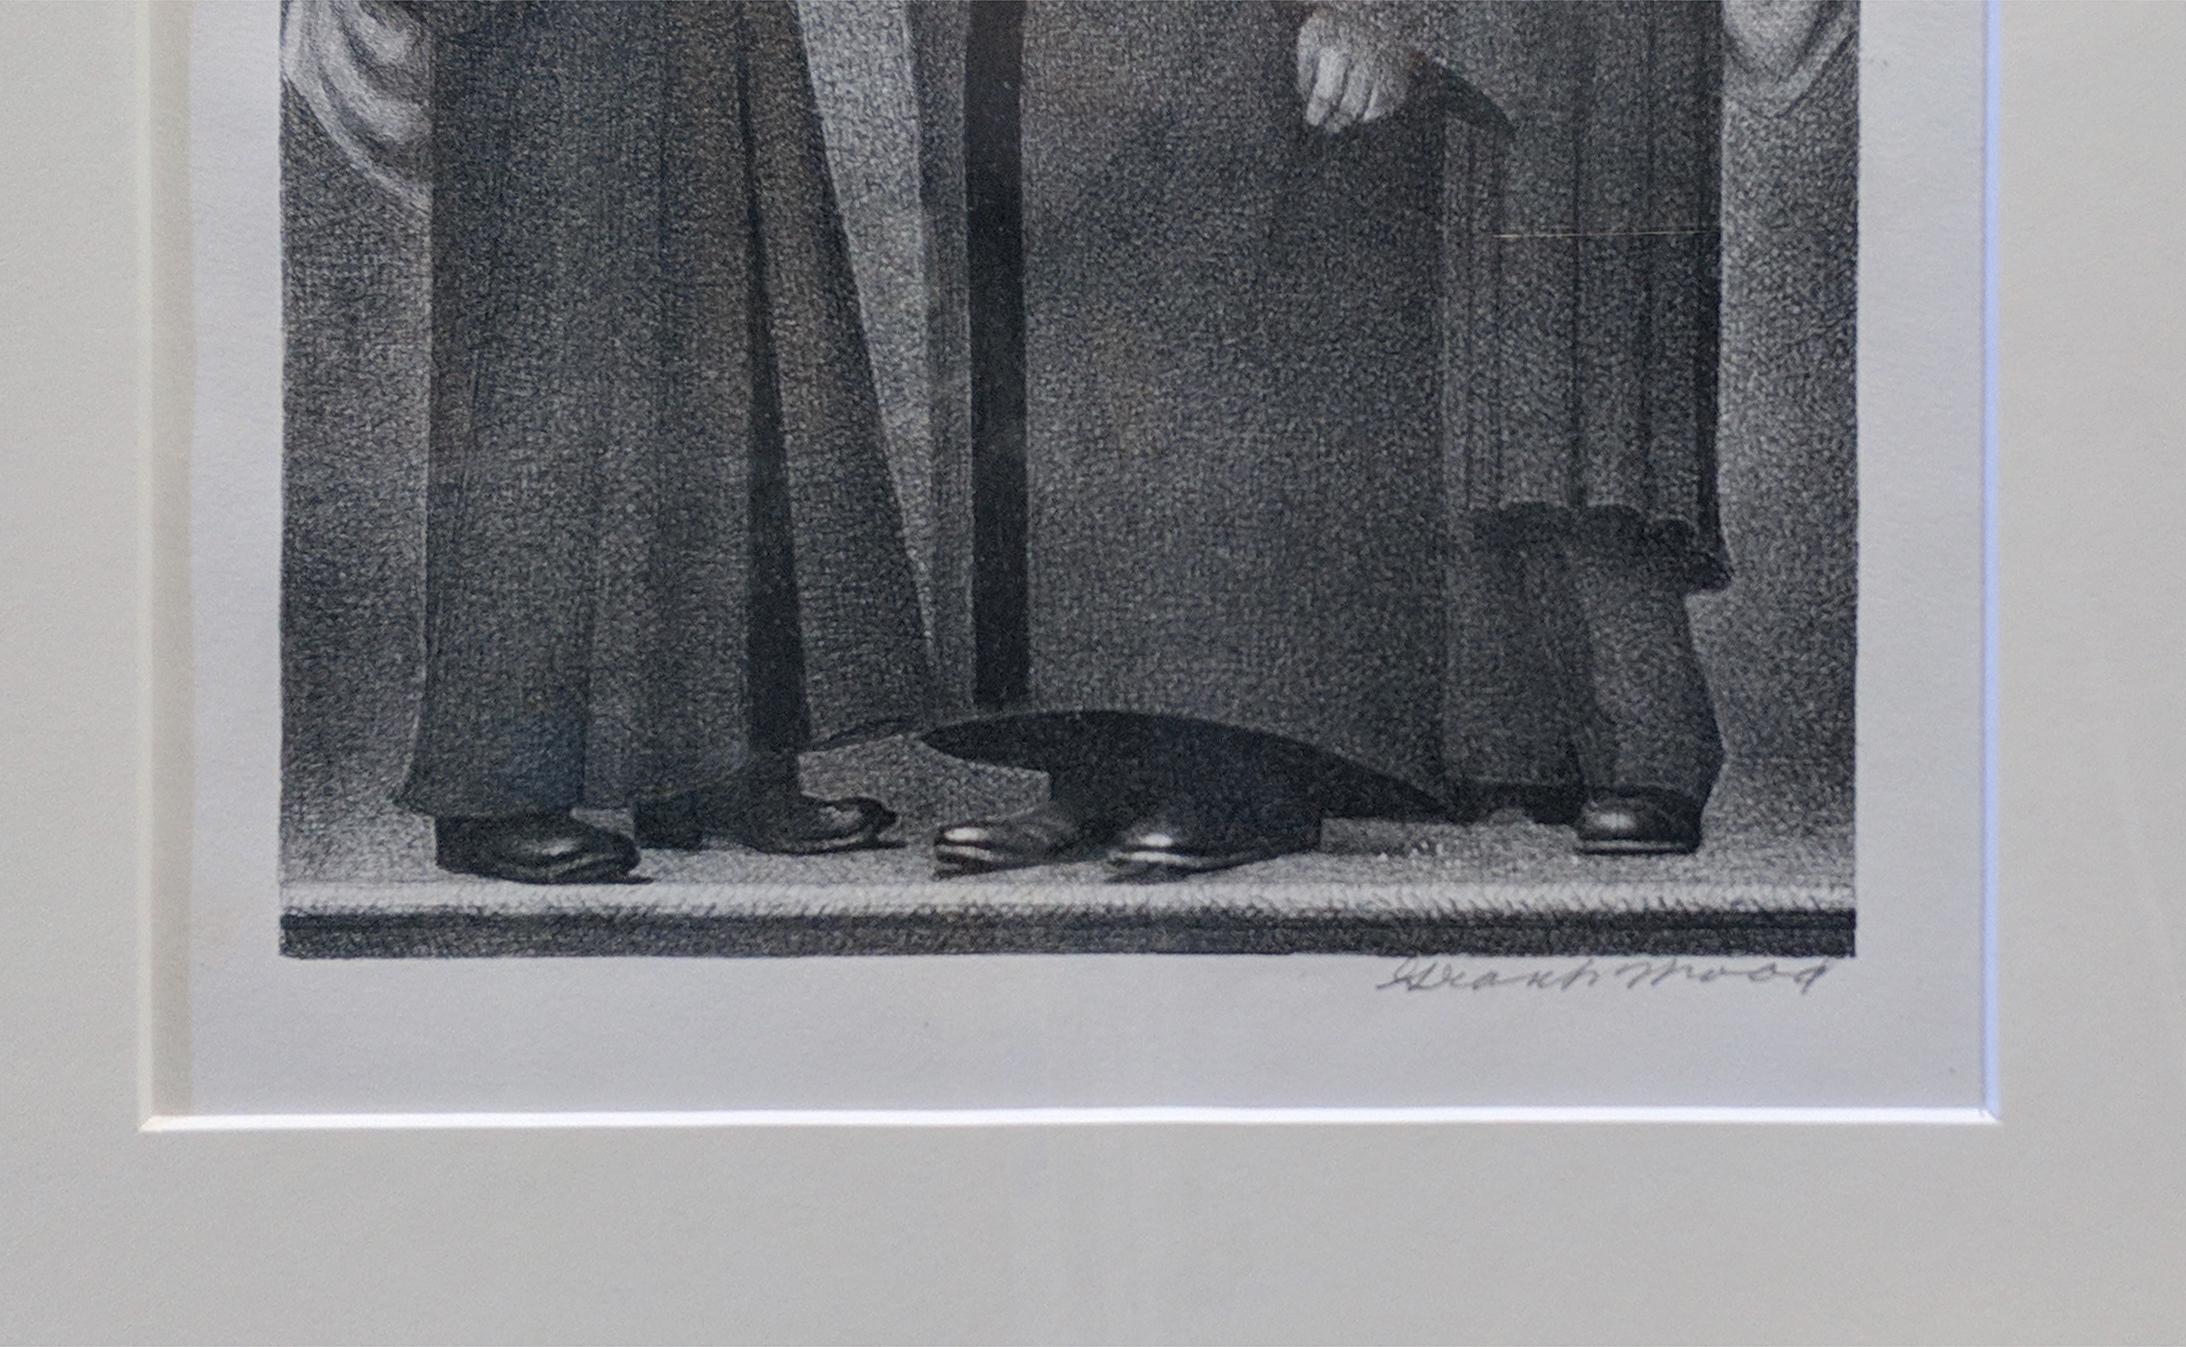 HONORARY DEGREE - Contemporary Print by Grant Wood